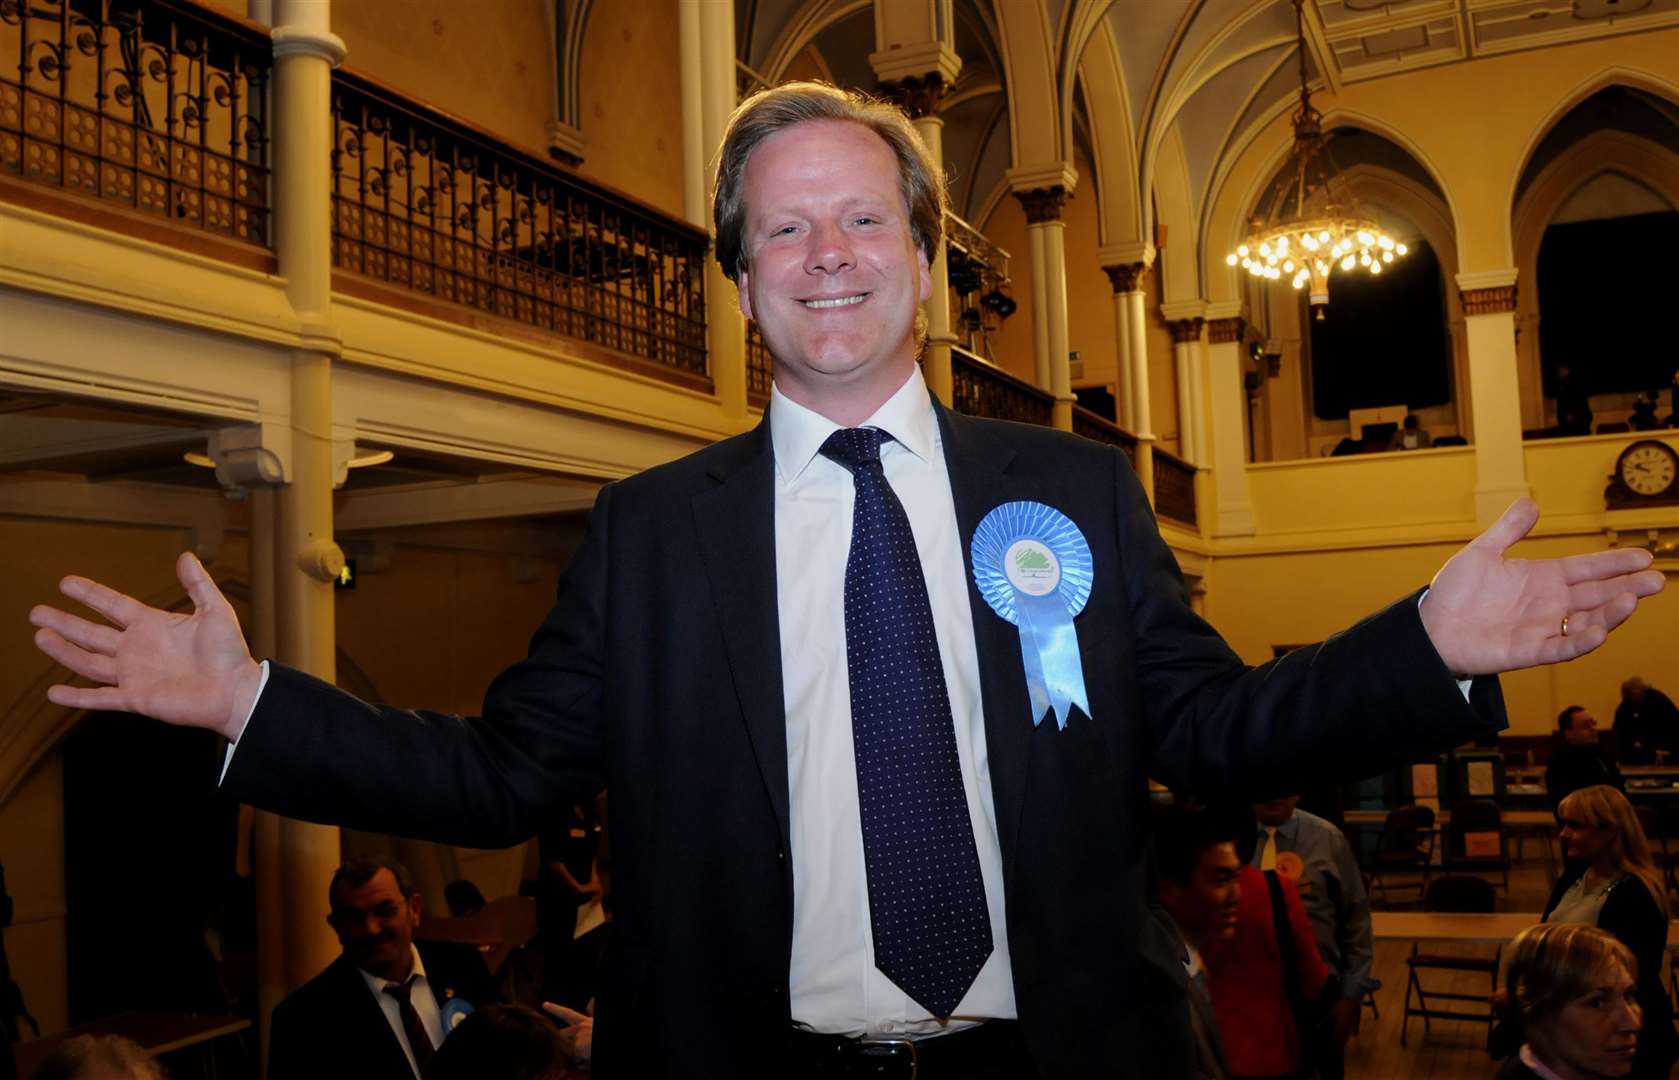 Elphicke on his first election as an MP: 10 years before his downfall